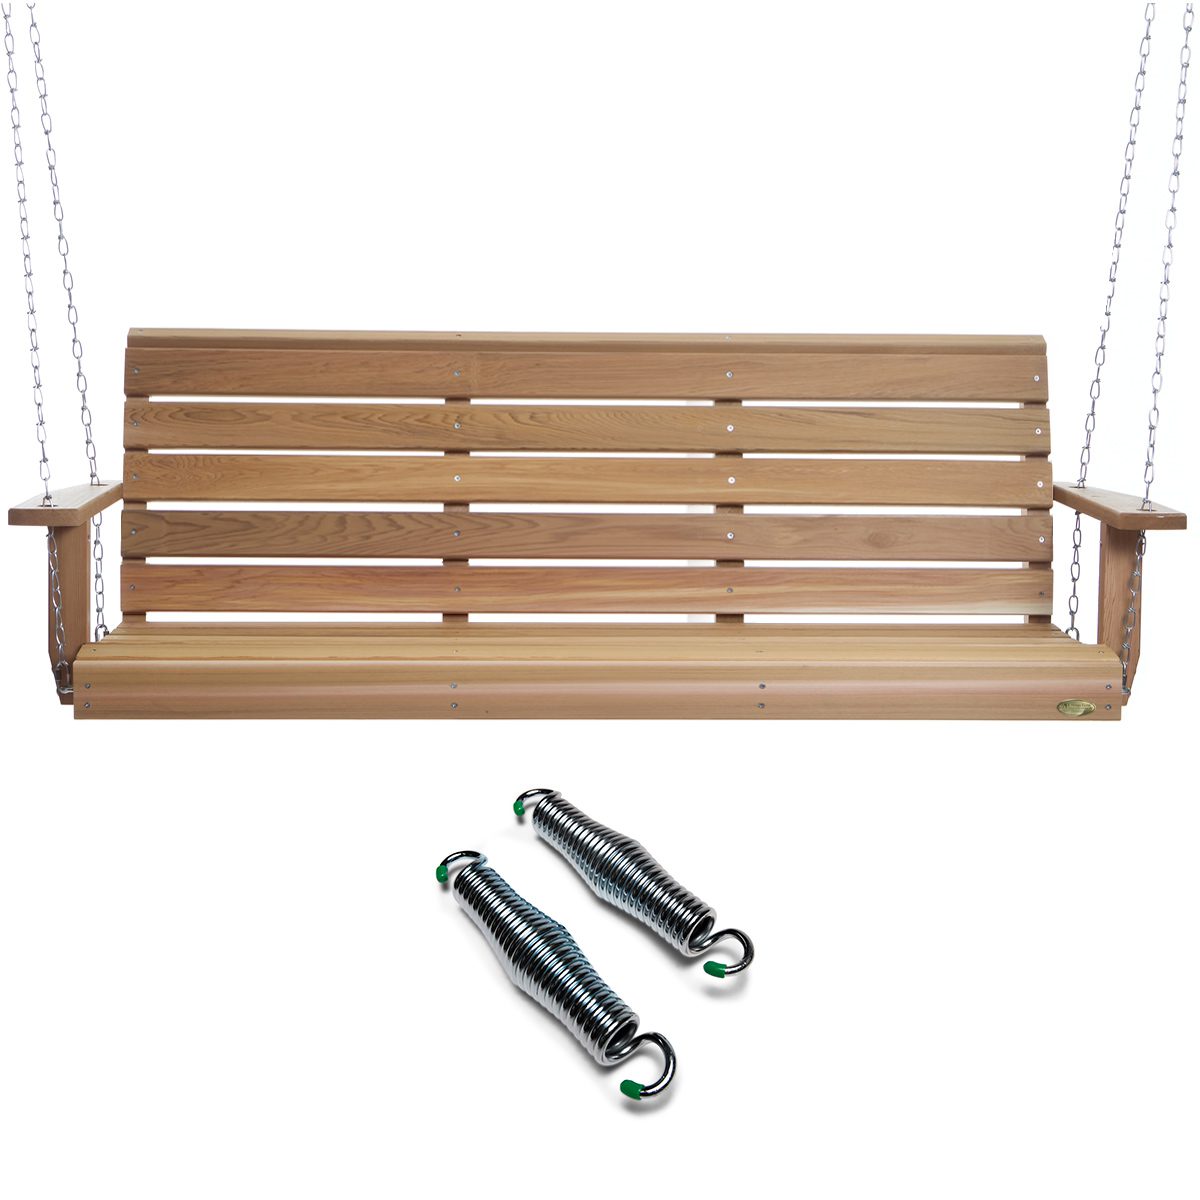 6 foot Porch Swing With Comfort Swing Springs - All Things Cedar - PS70-SW10